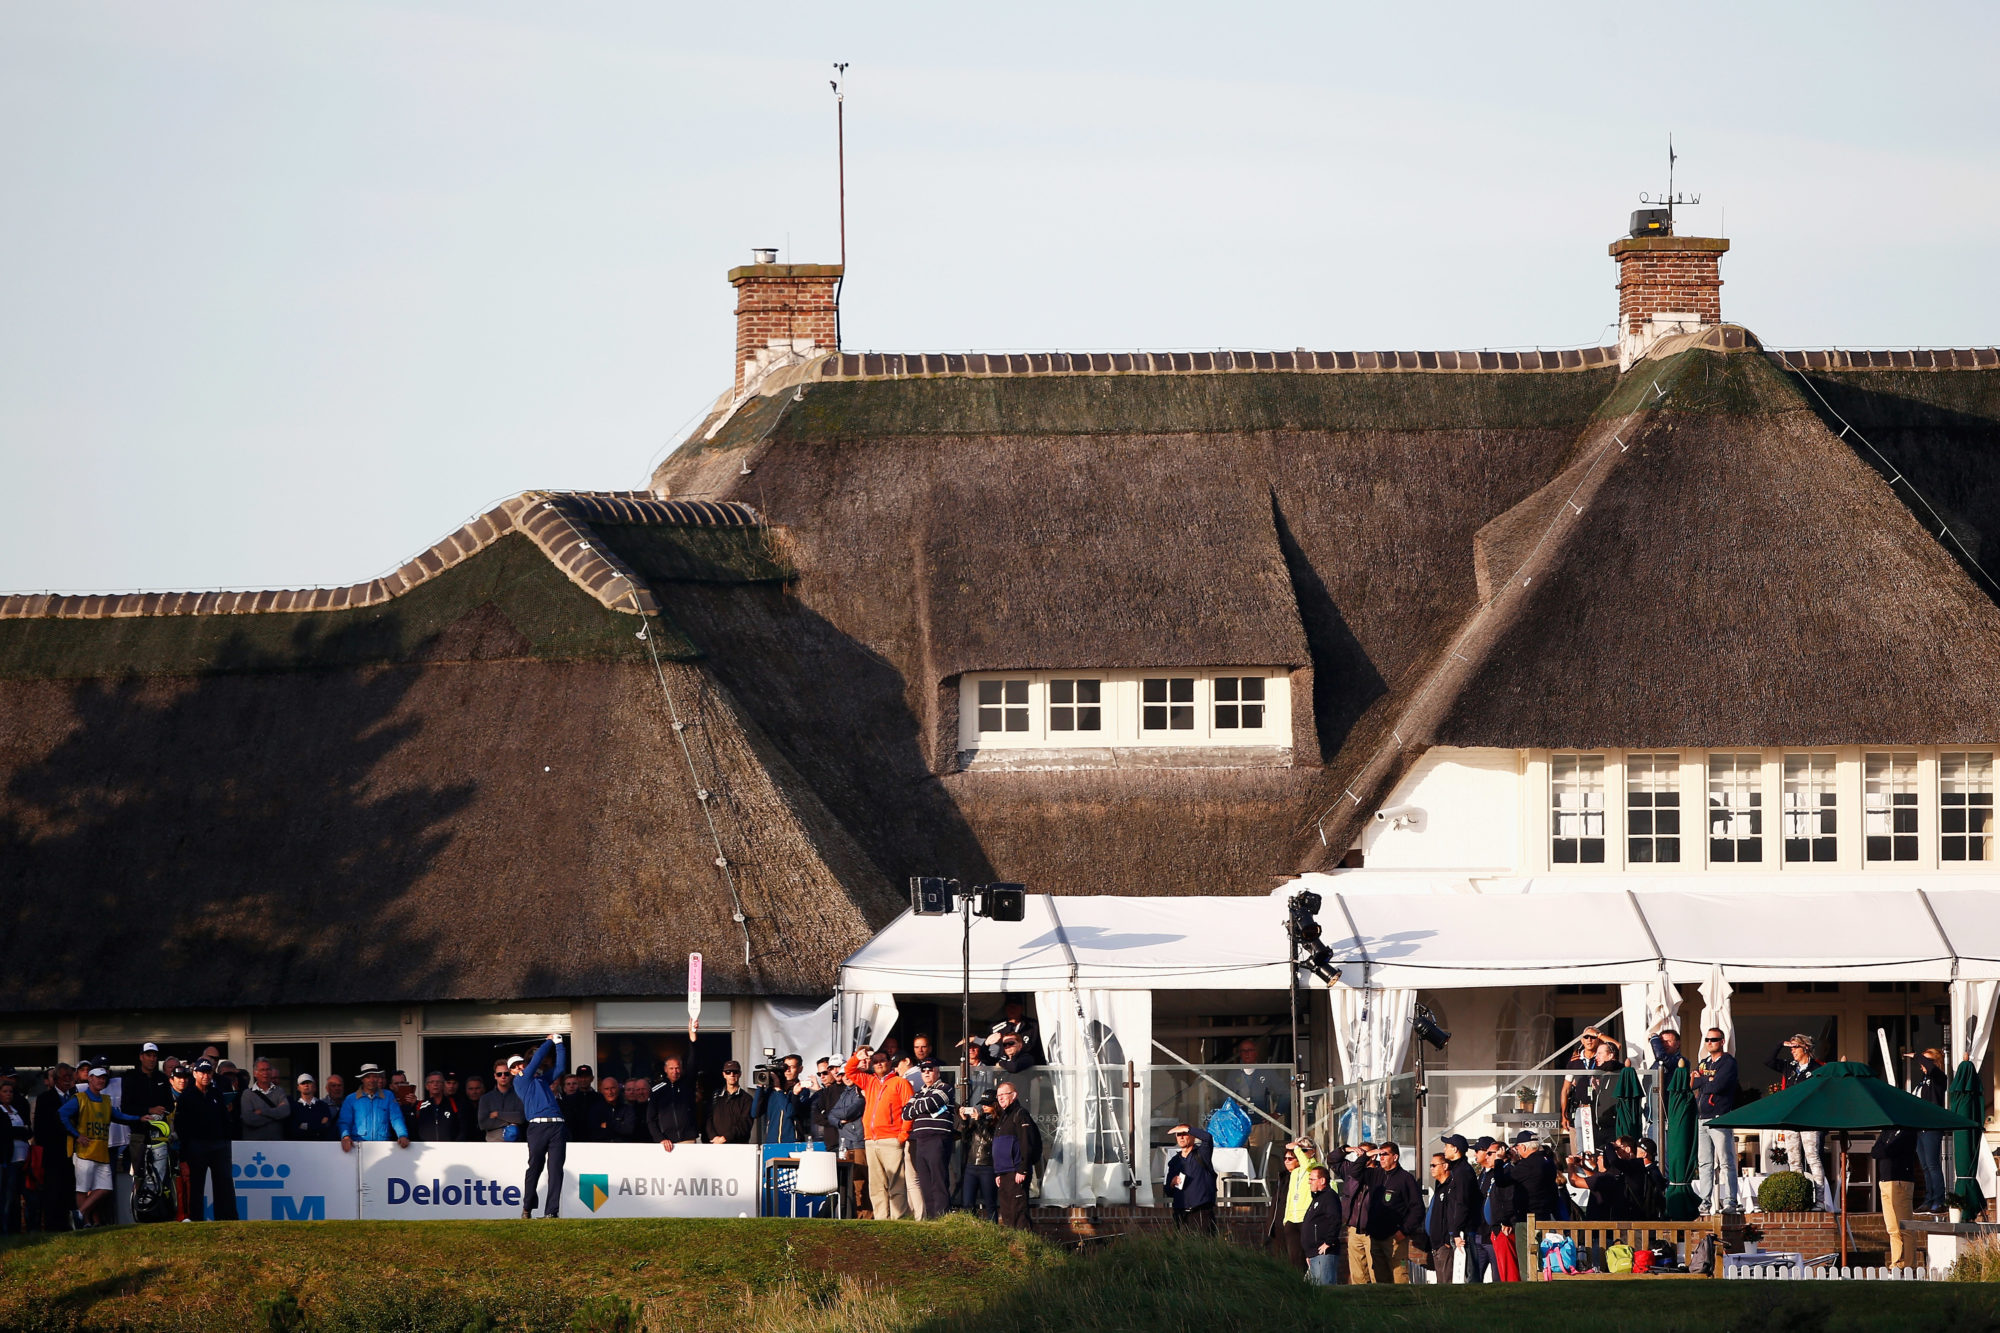 KLM Open - Day One